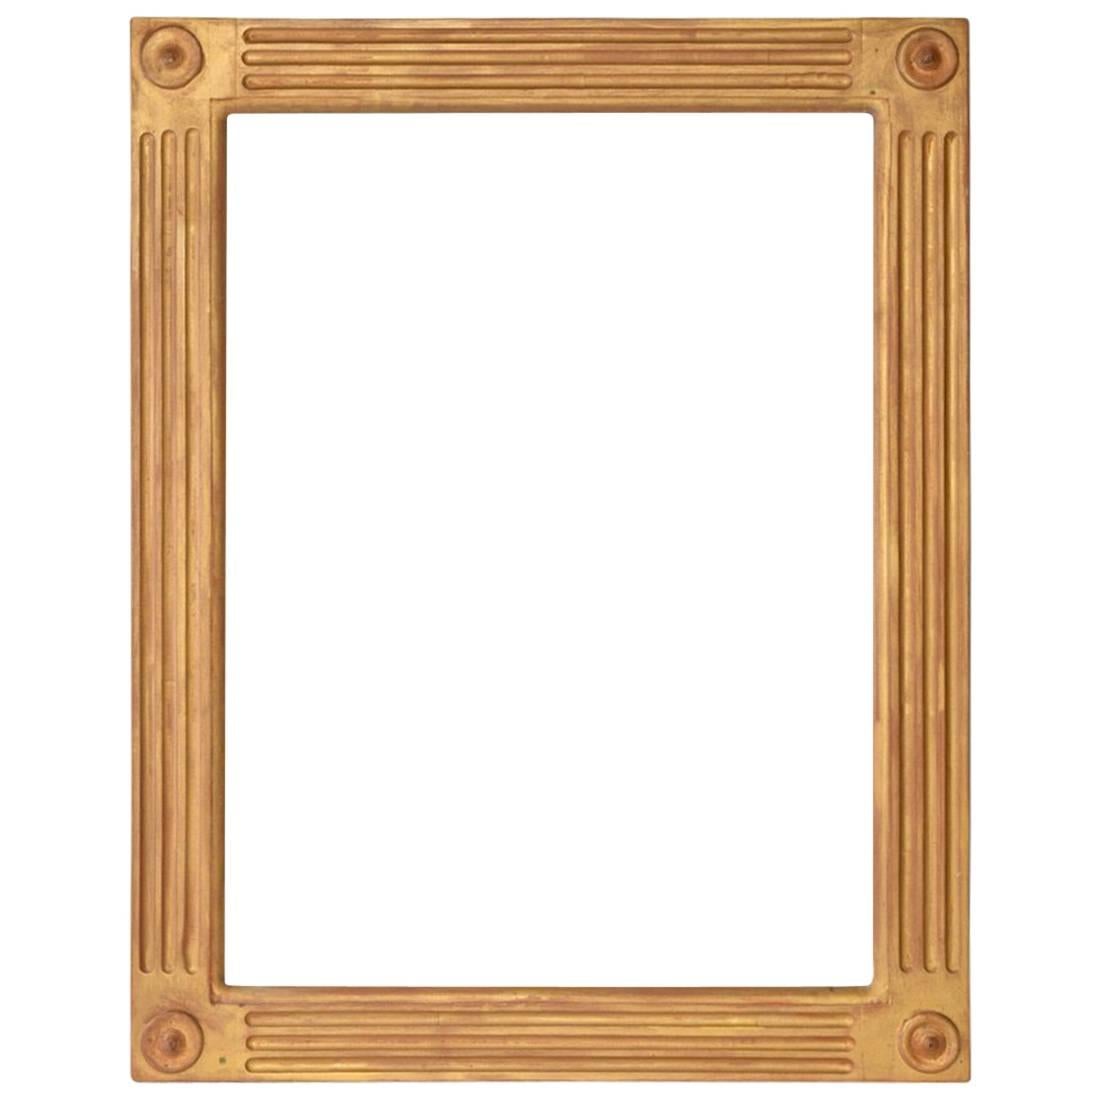 Neoclassical Style Mirror or Picture Frame